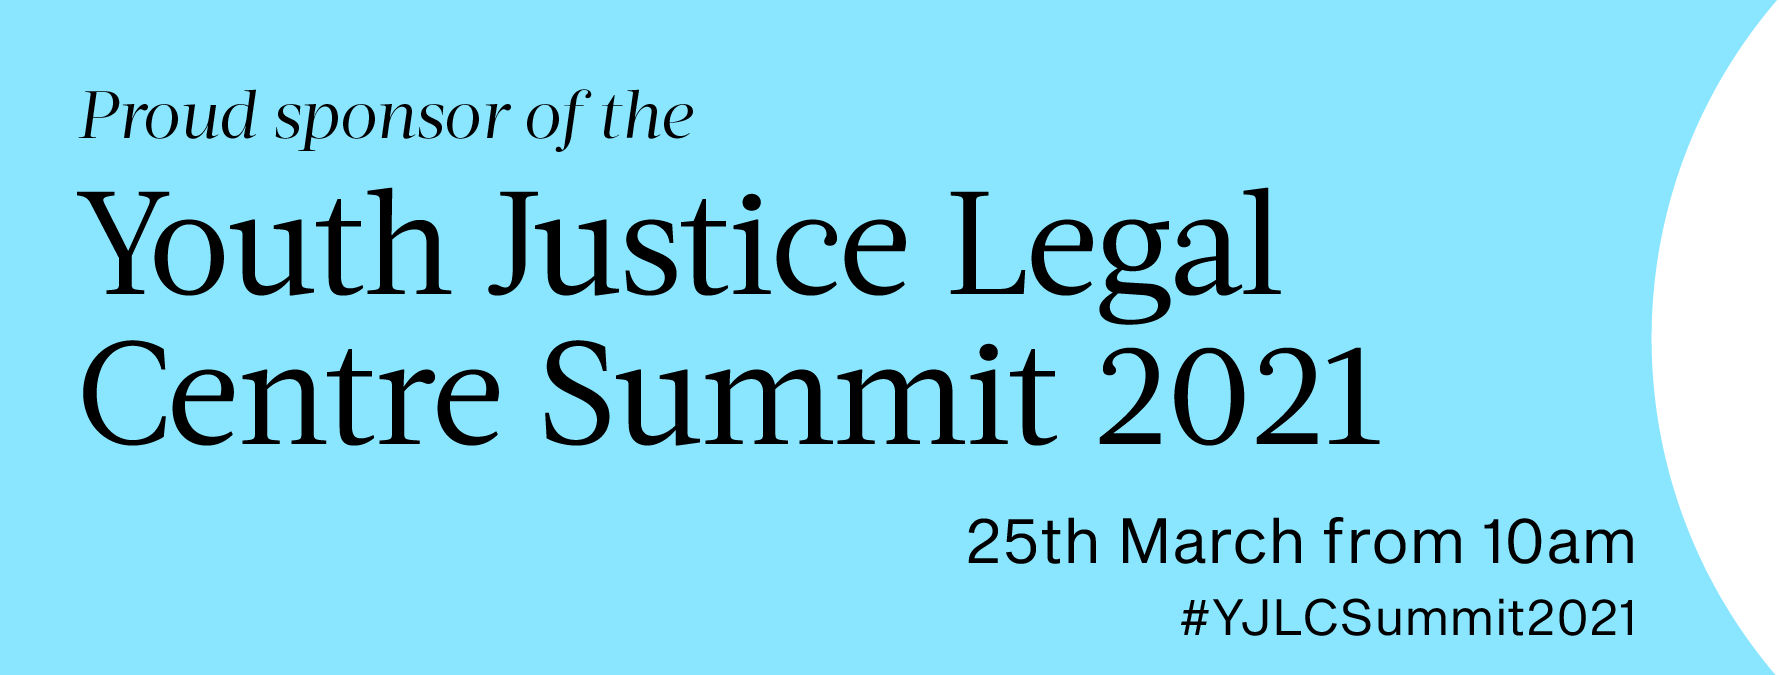 Youth Justice Legal Centre Summit 2021